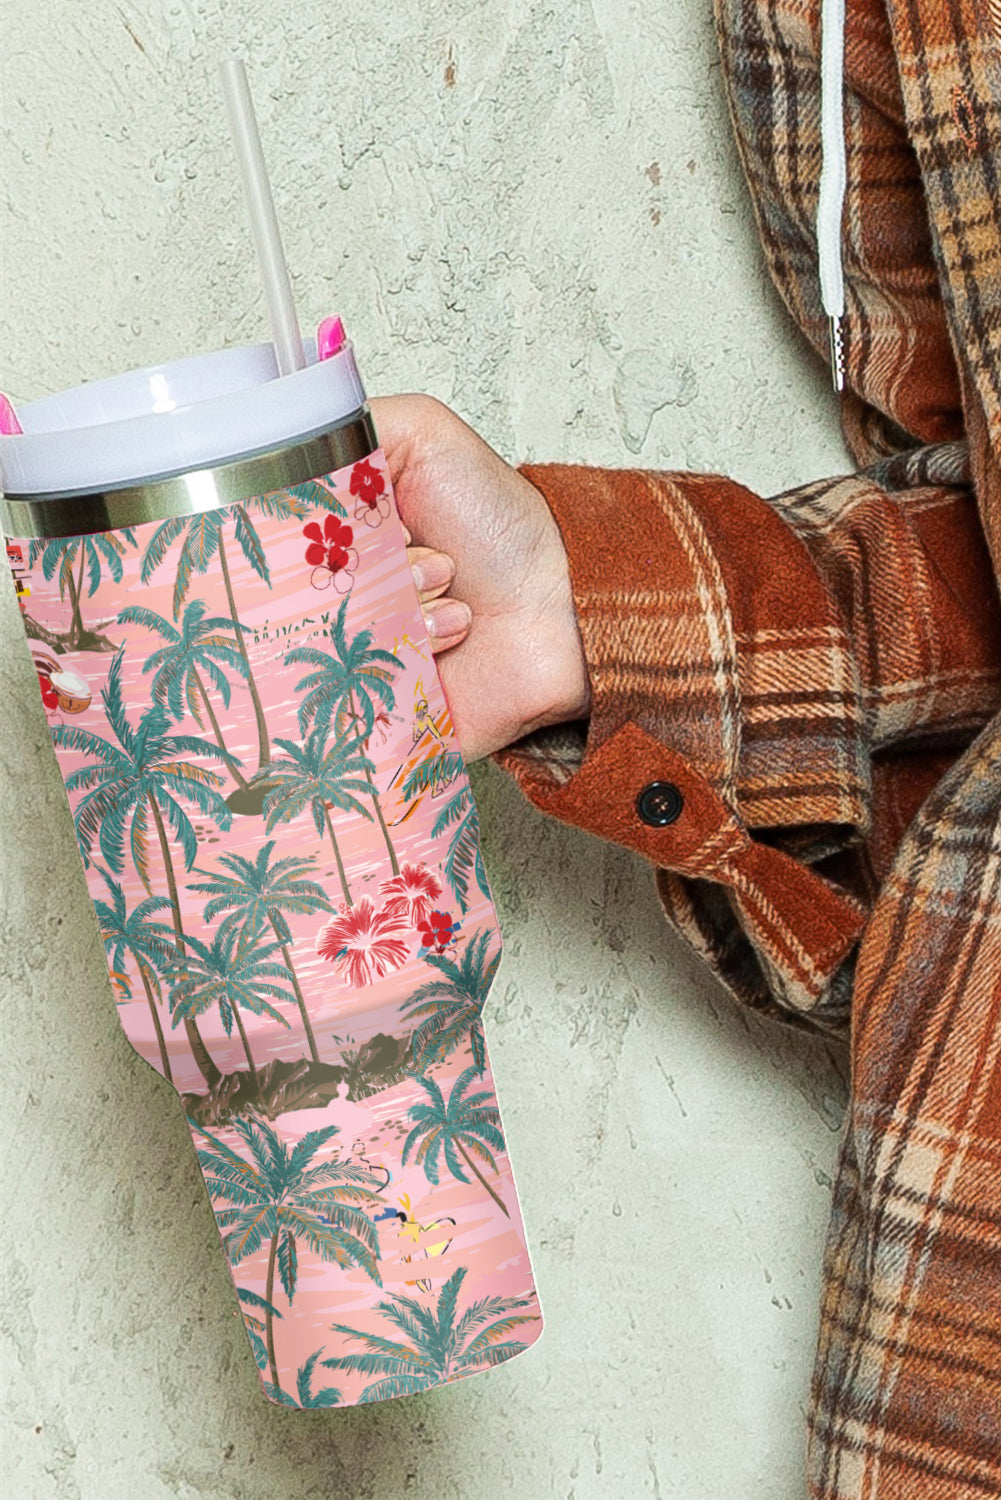 Rose Red Tropical Trees Print Stainless Steel Tumbler 40oz Tumblers JT's Designer Fashion